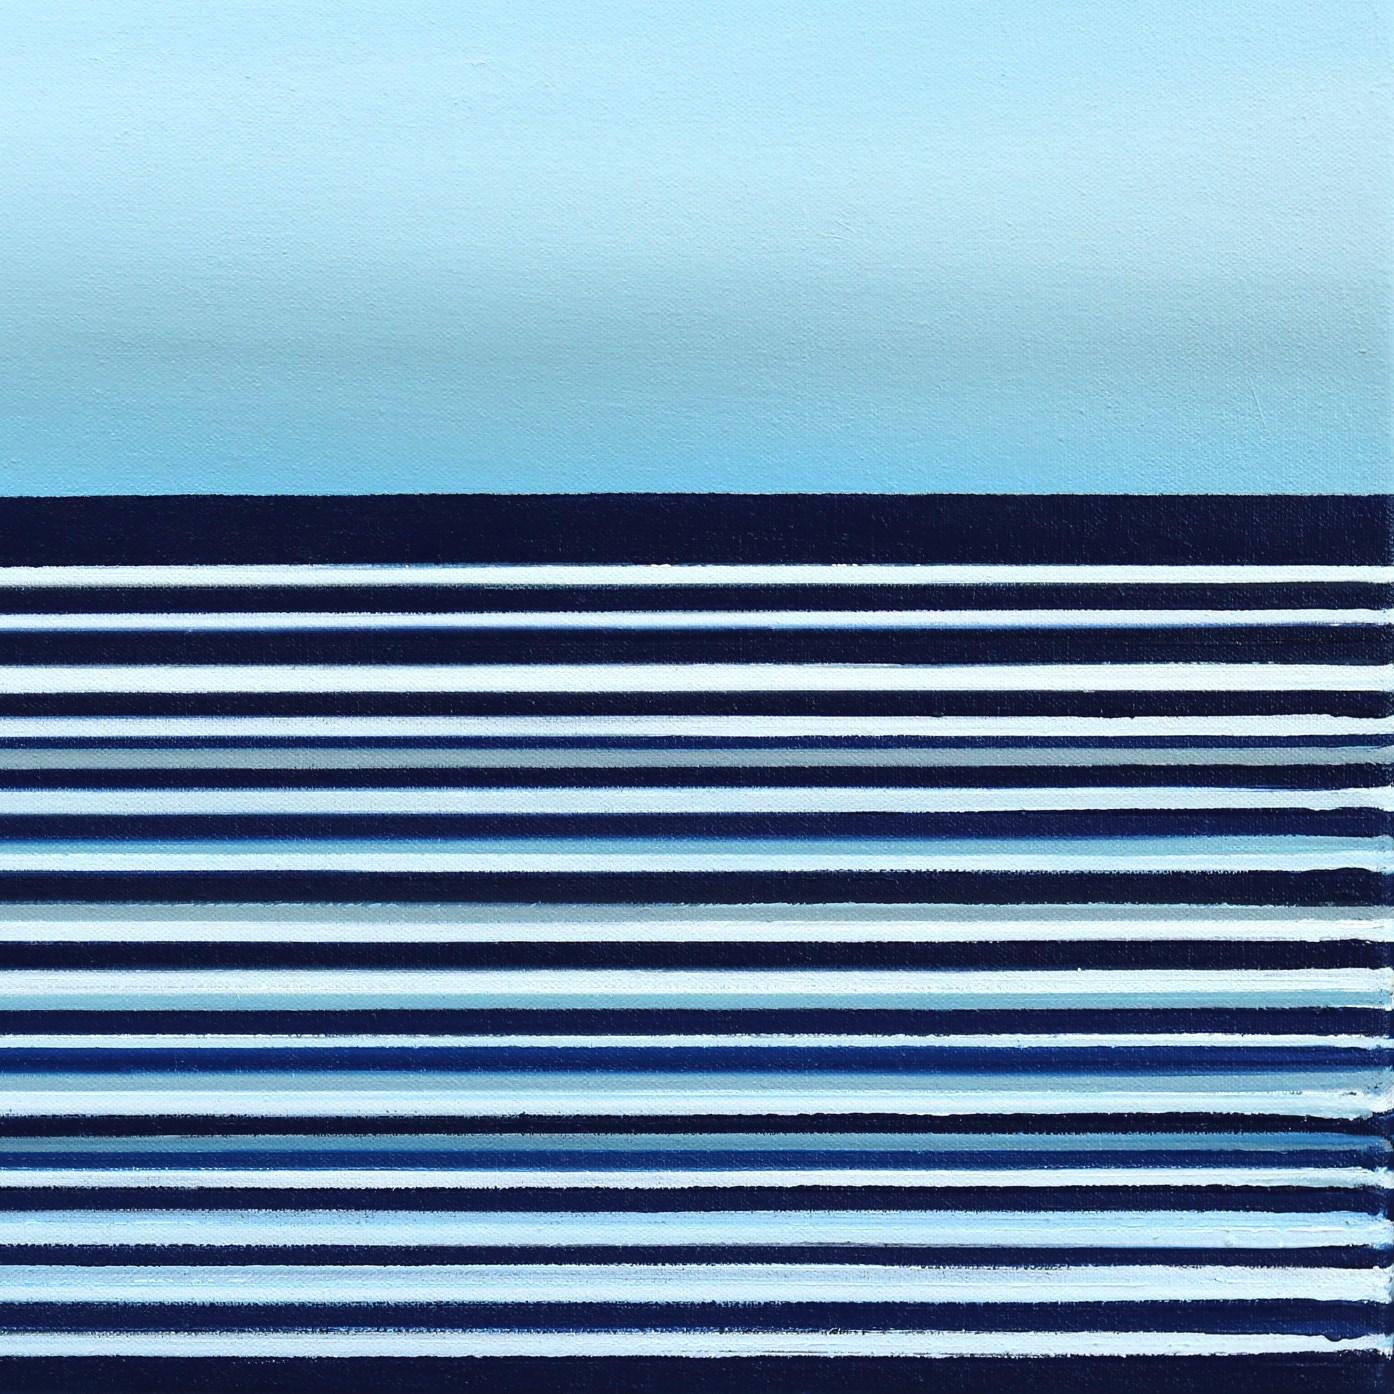 Untitled No. 763 - Framed Contemporary Minimalist Blue Artwork For Sale 6